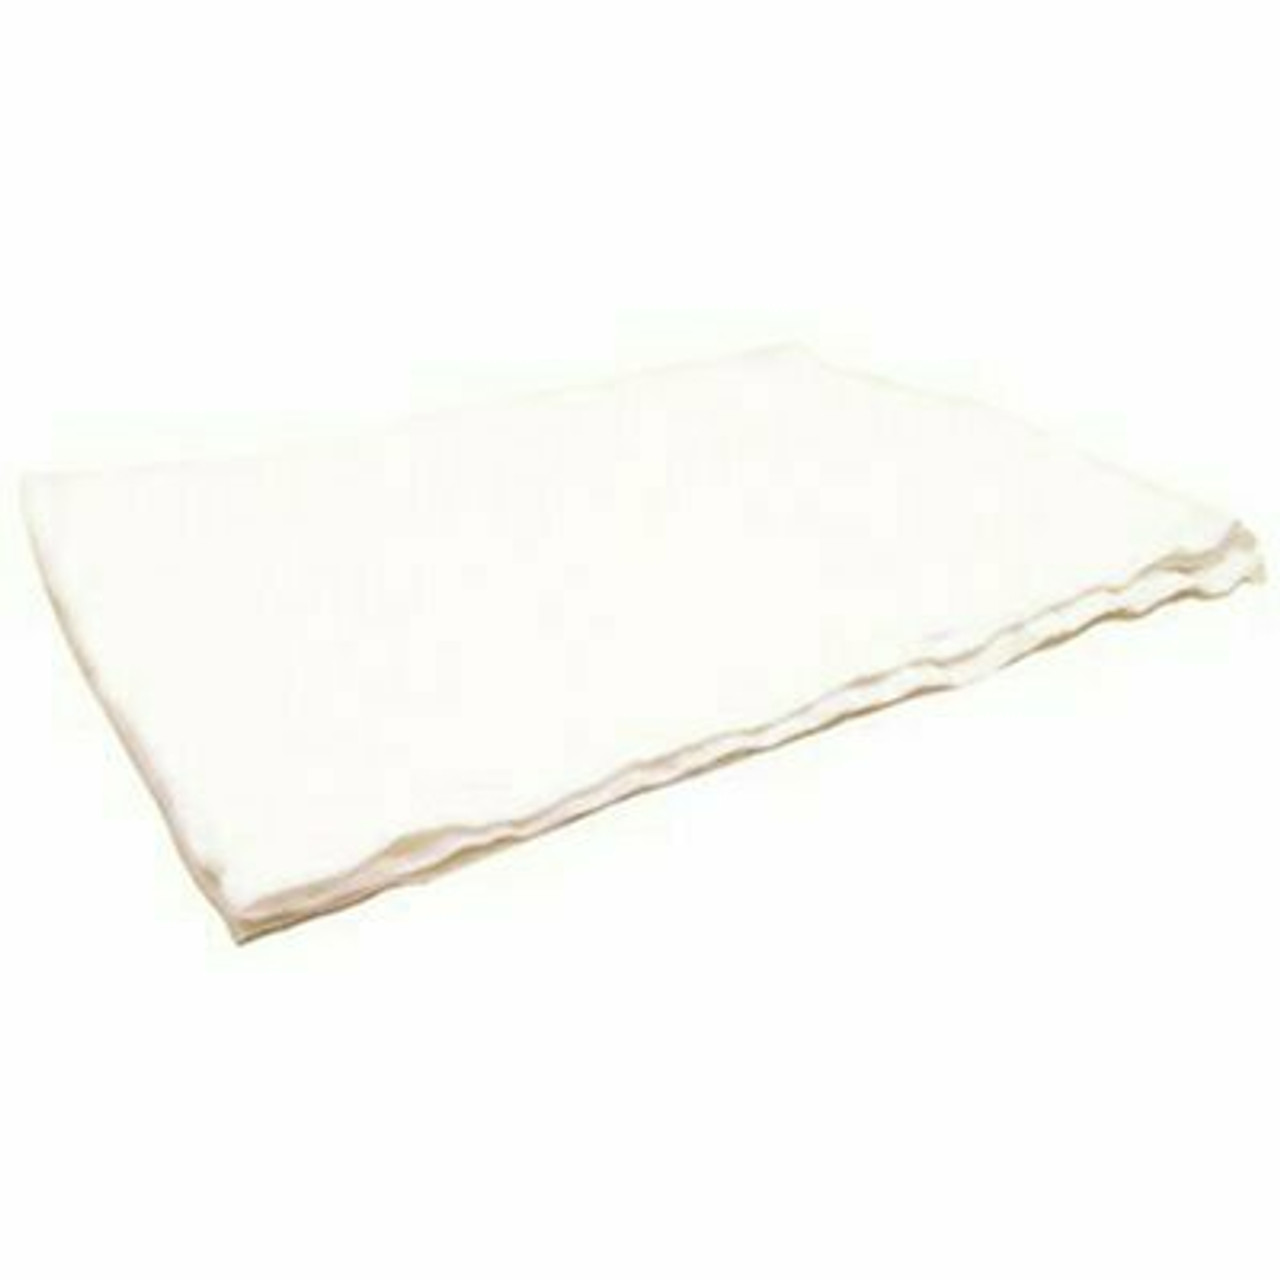 Intex 25 Lbs. White Linen Wipers